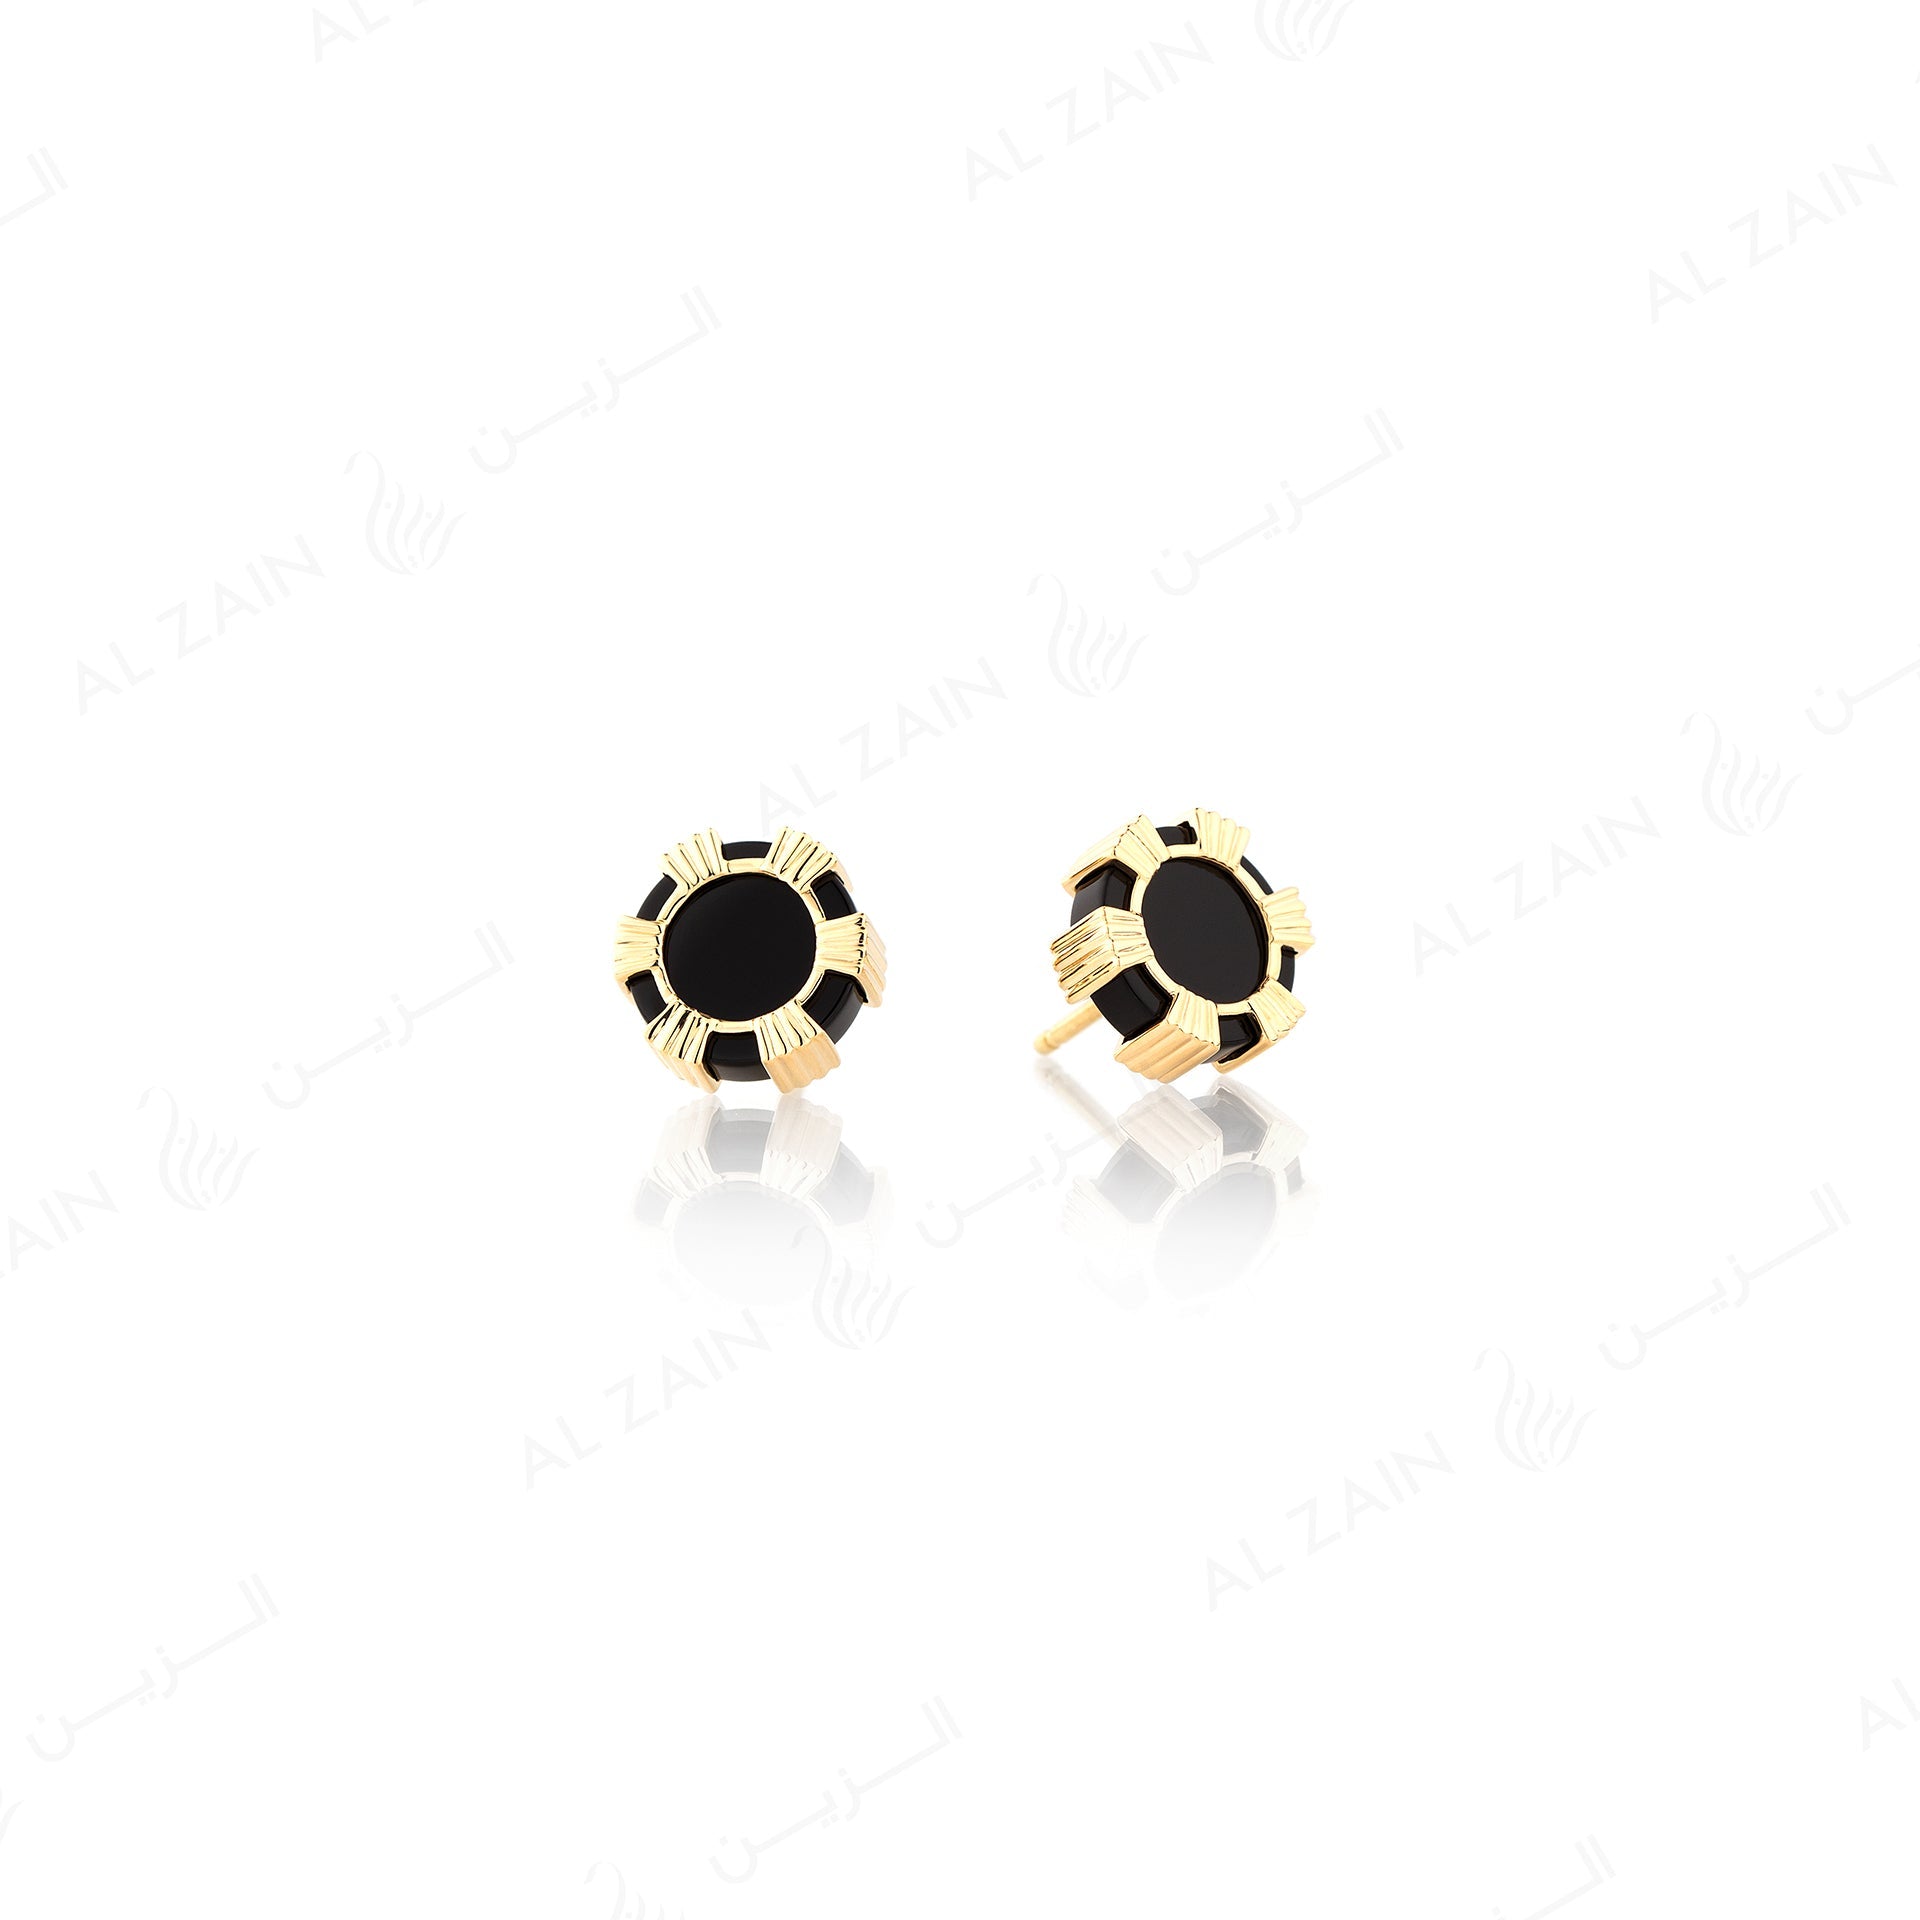 Cordoba earrings in yellow gold with onyx stones